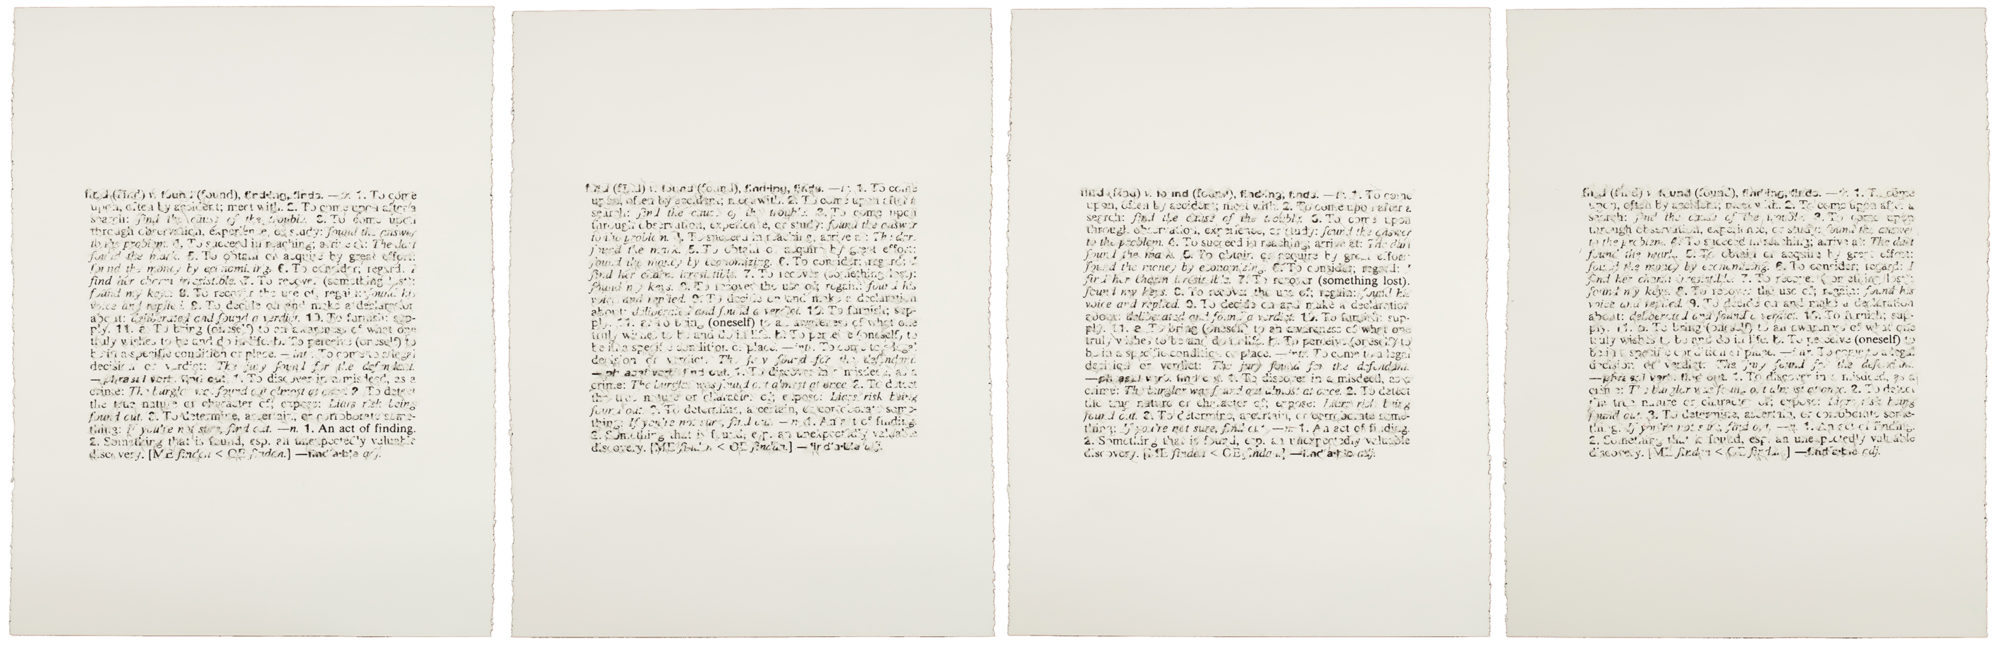 A polyptych of justified text, handwritten on white parchment